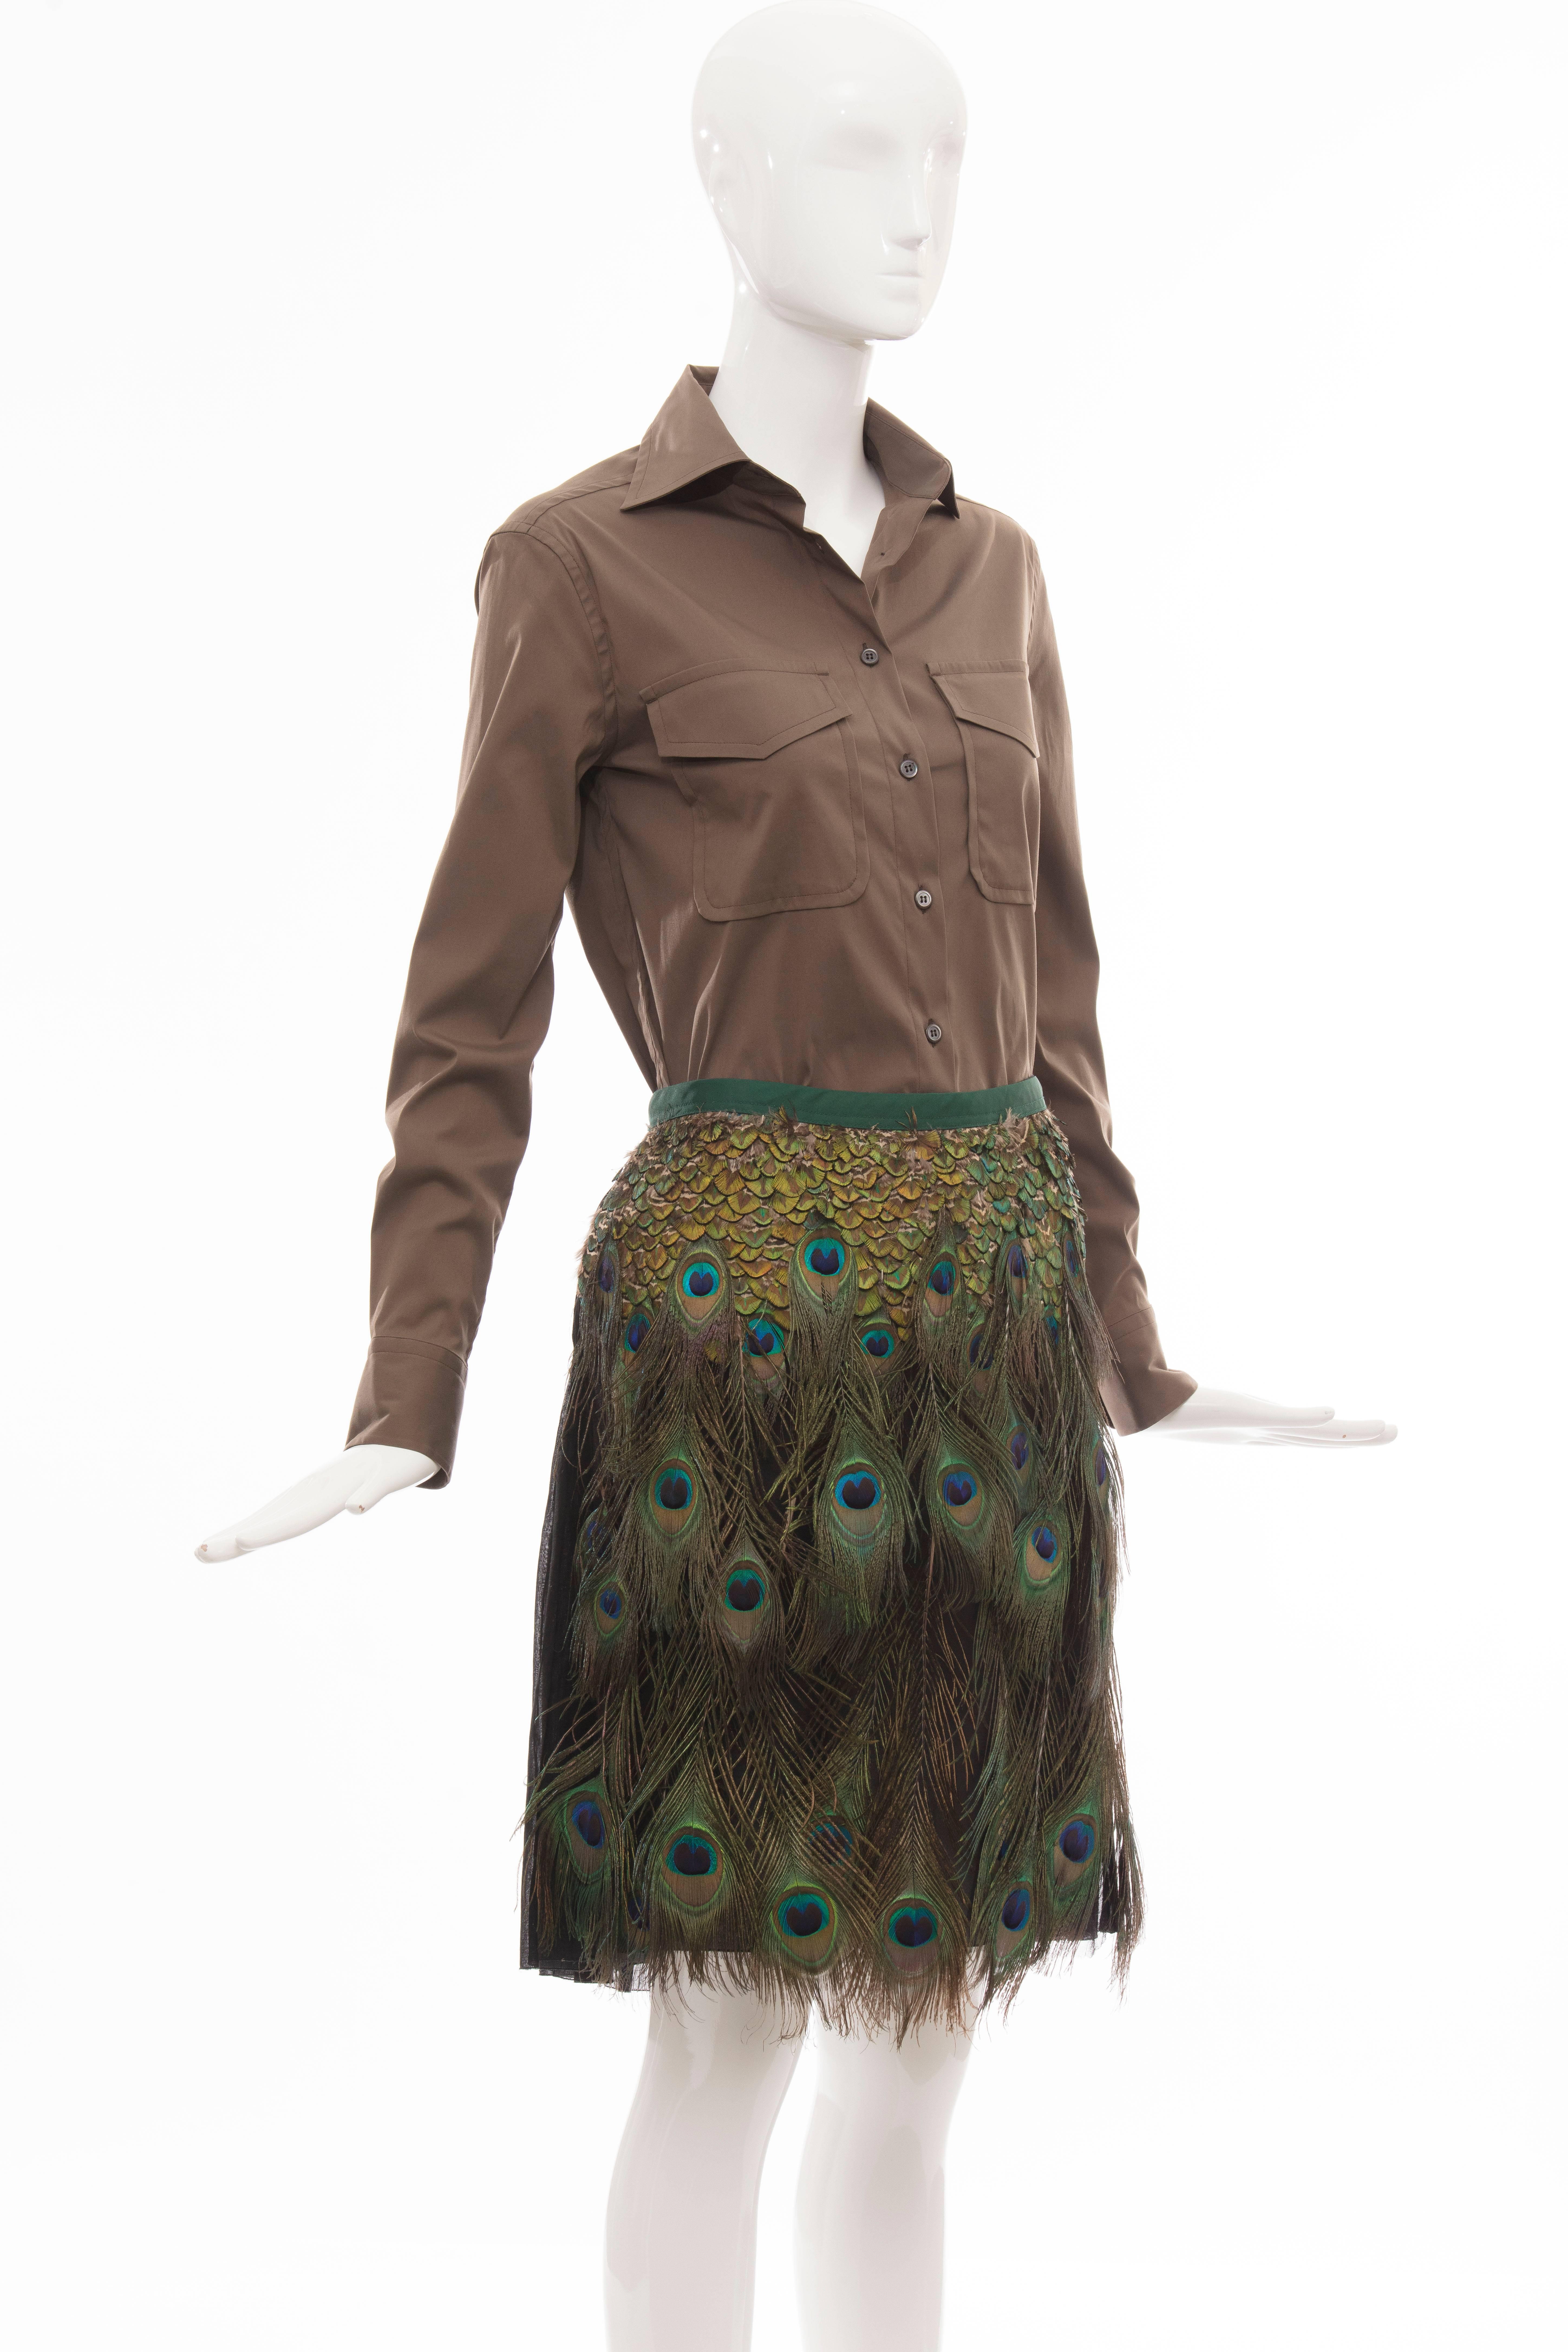 Black Prada Runway Cotton Button Front Top & Peacock Feather A-Line Skirt, Spring 2005 For Sale